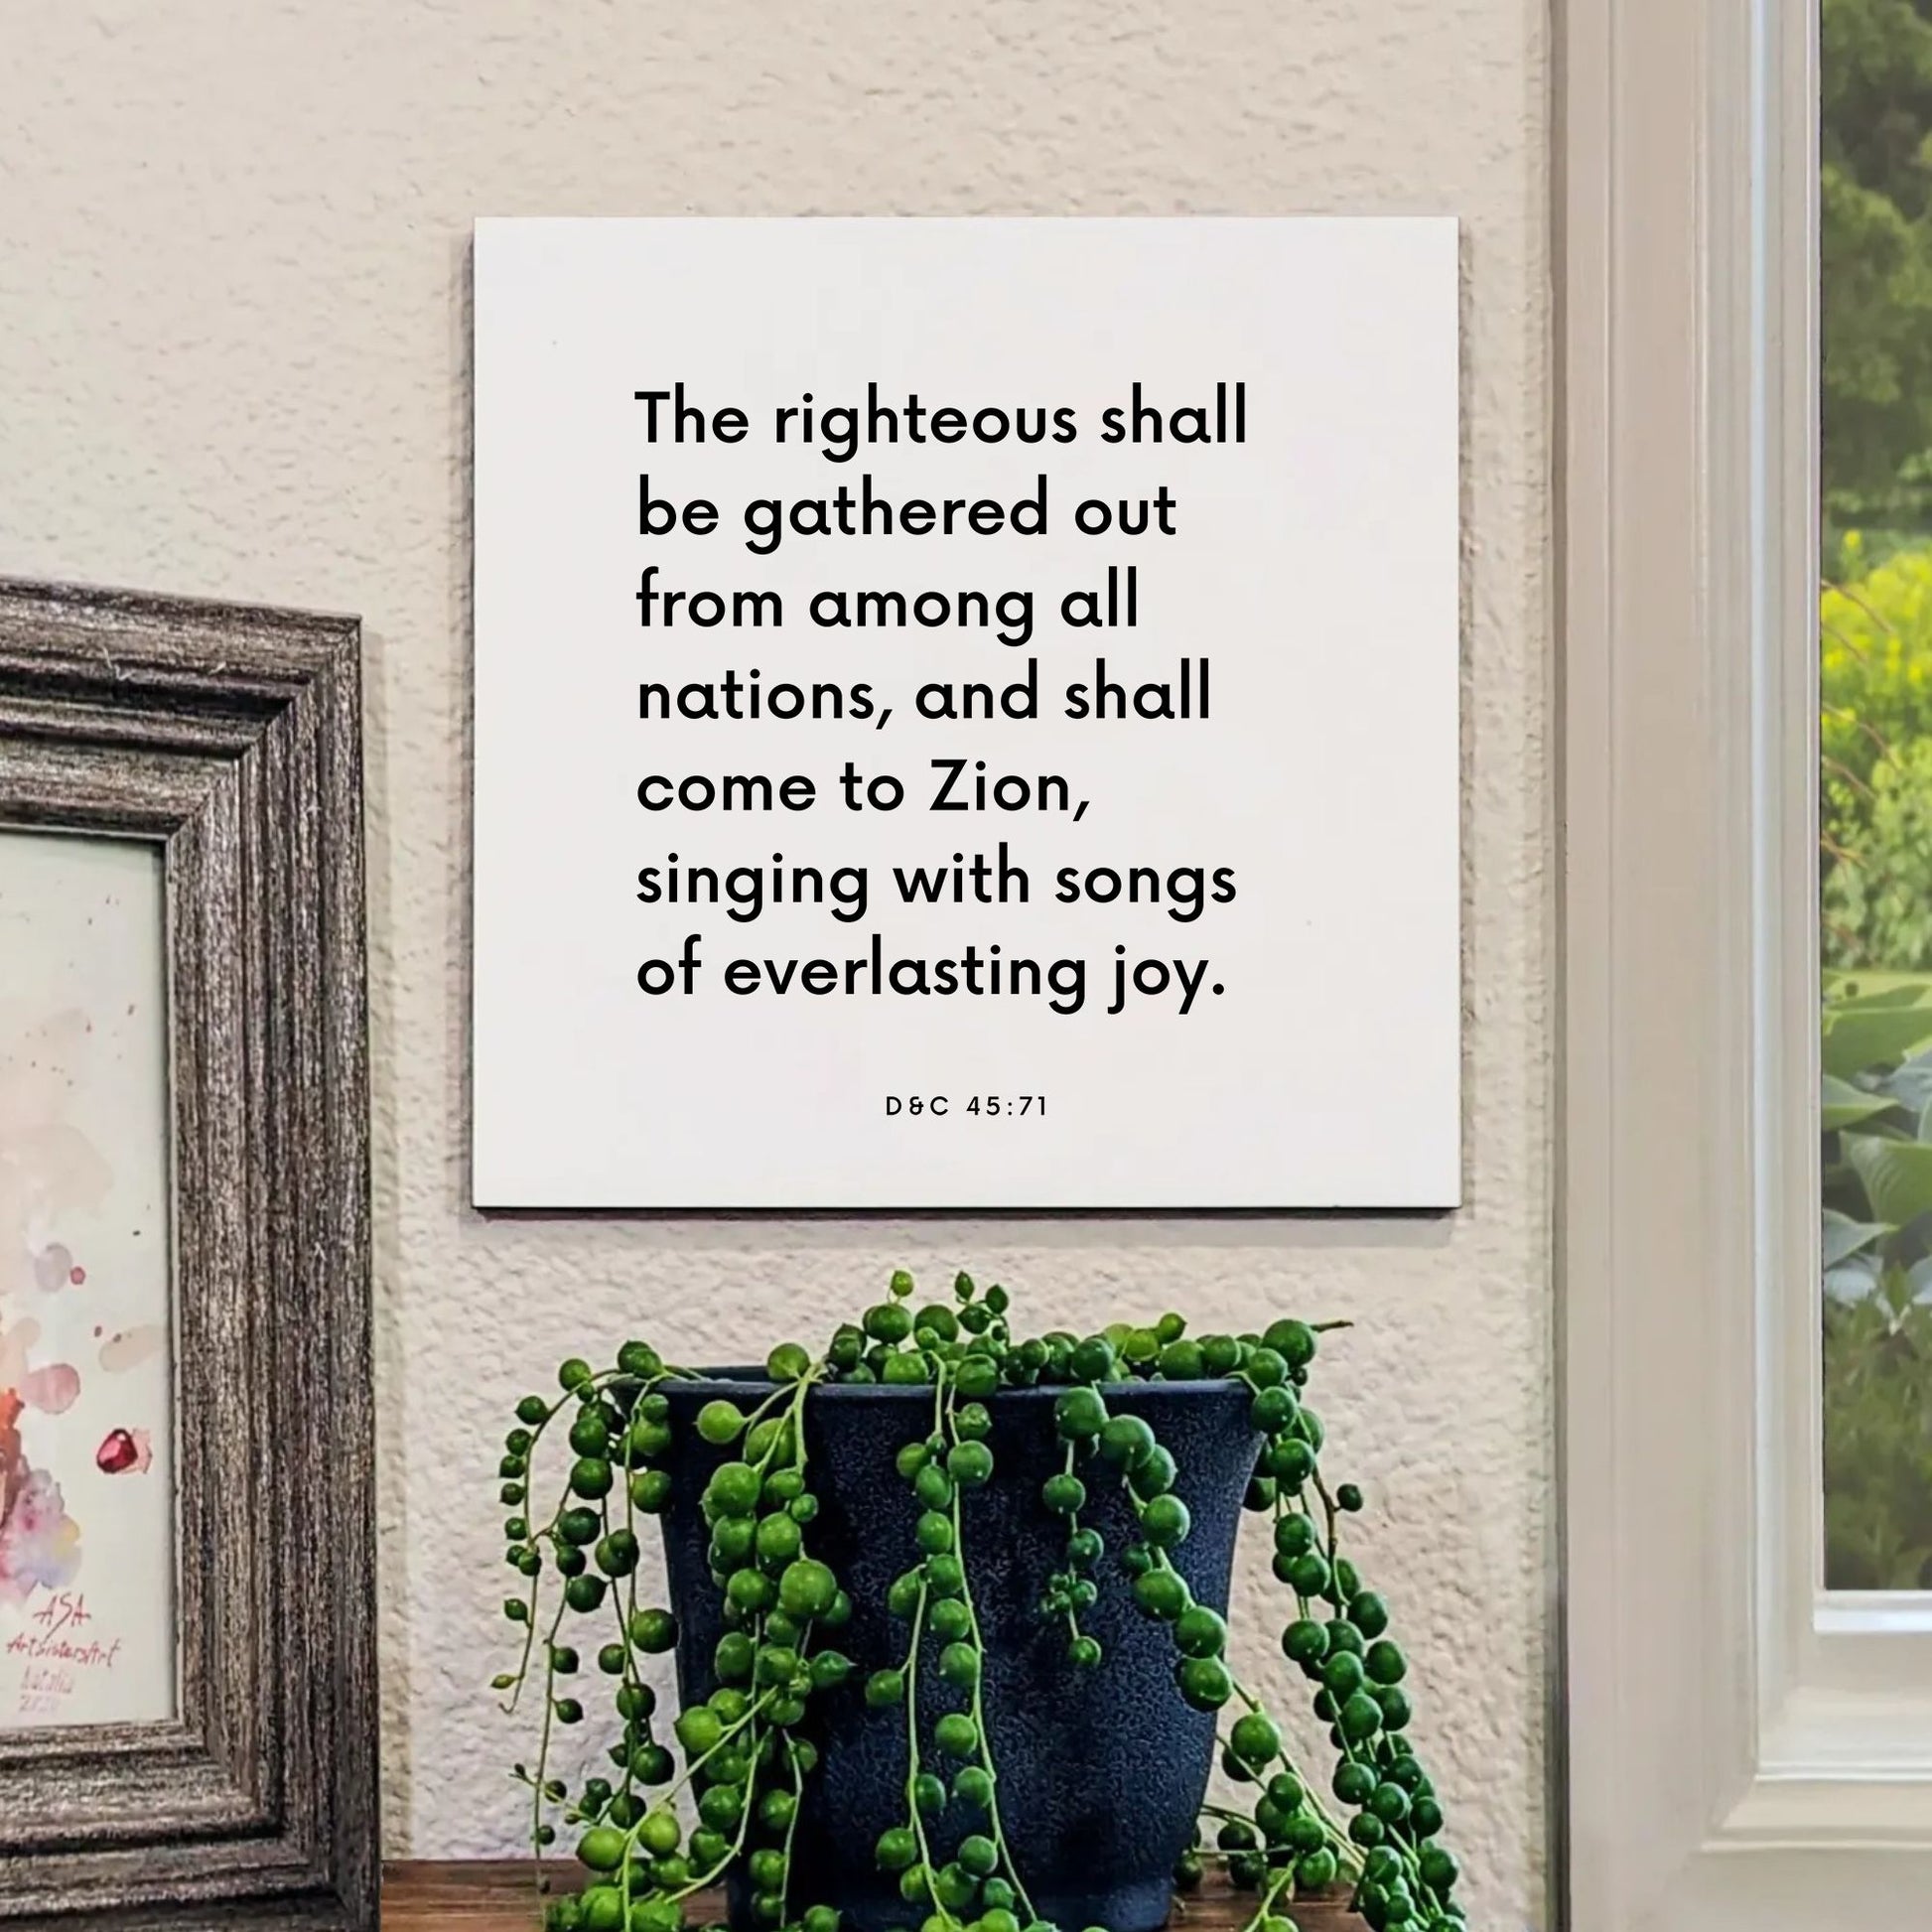 Window mouting of the scripture tile for D&C 45:71 - "The righteous shall be gathered out from among all nations"